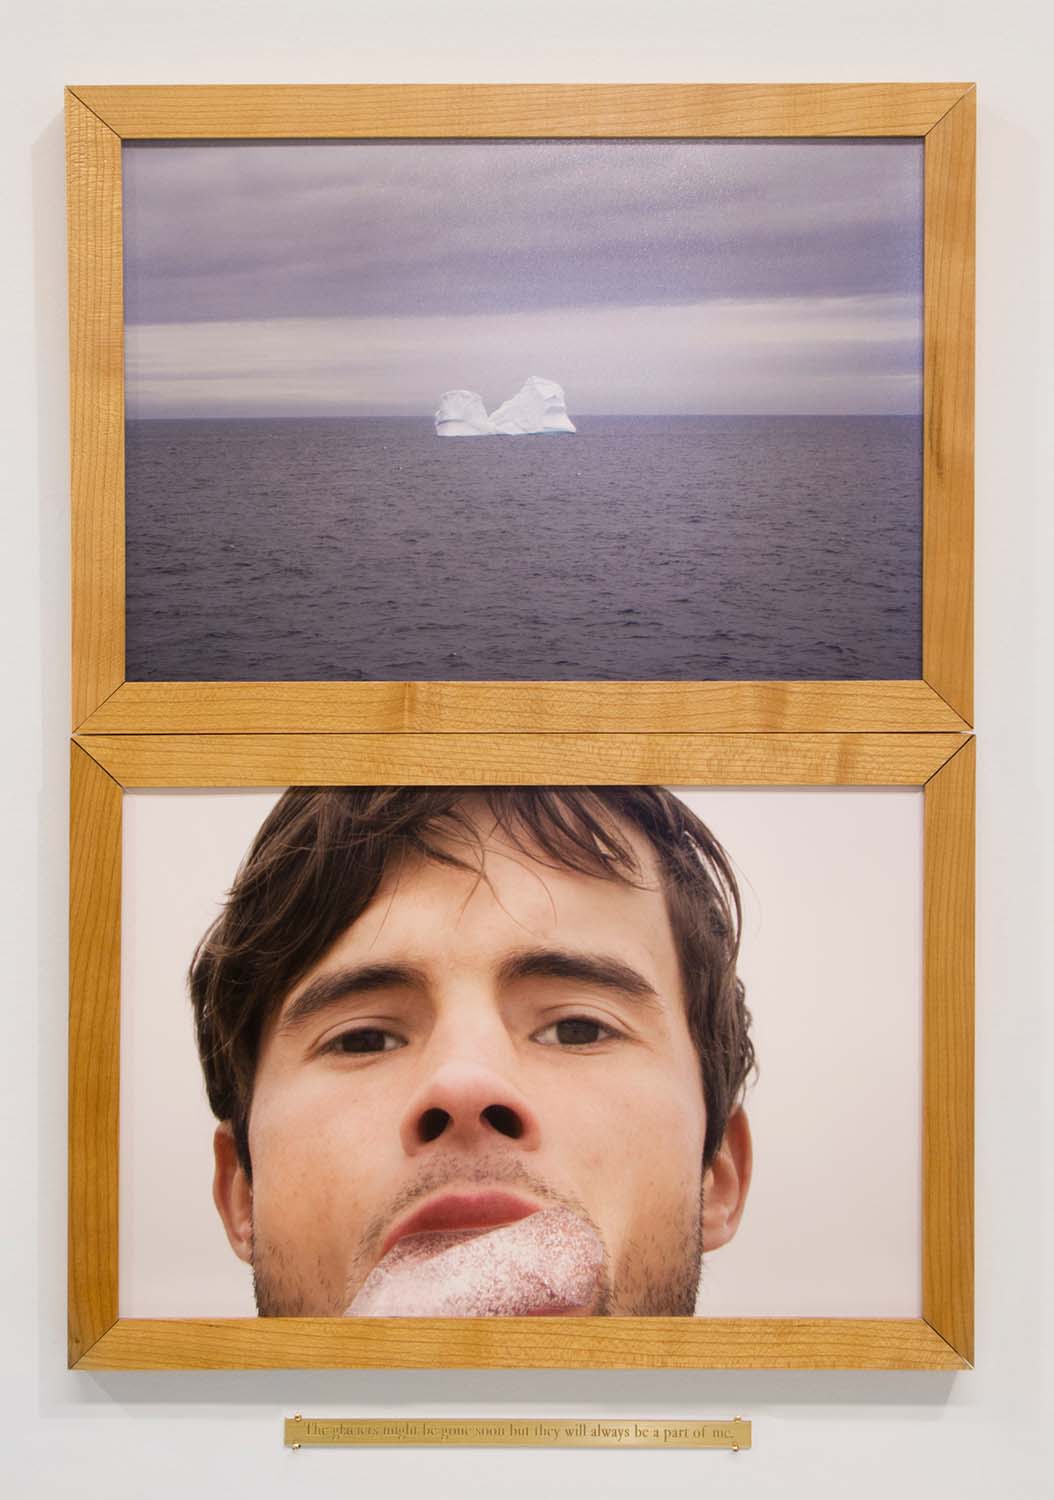 The Glaciers Might Be Gone Soon but They Will Always Be a Part of Me. For this work from 2007, exhibited in 2013, he traveled to Labrador, Canada, to see an iceberg and take a selfie eating a bit of a bergy from the shoreline.